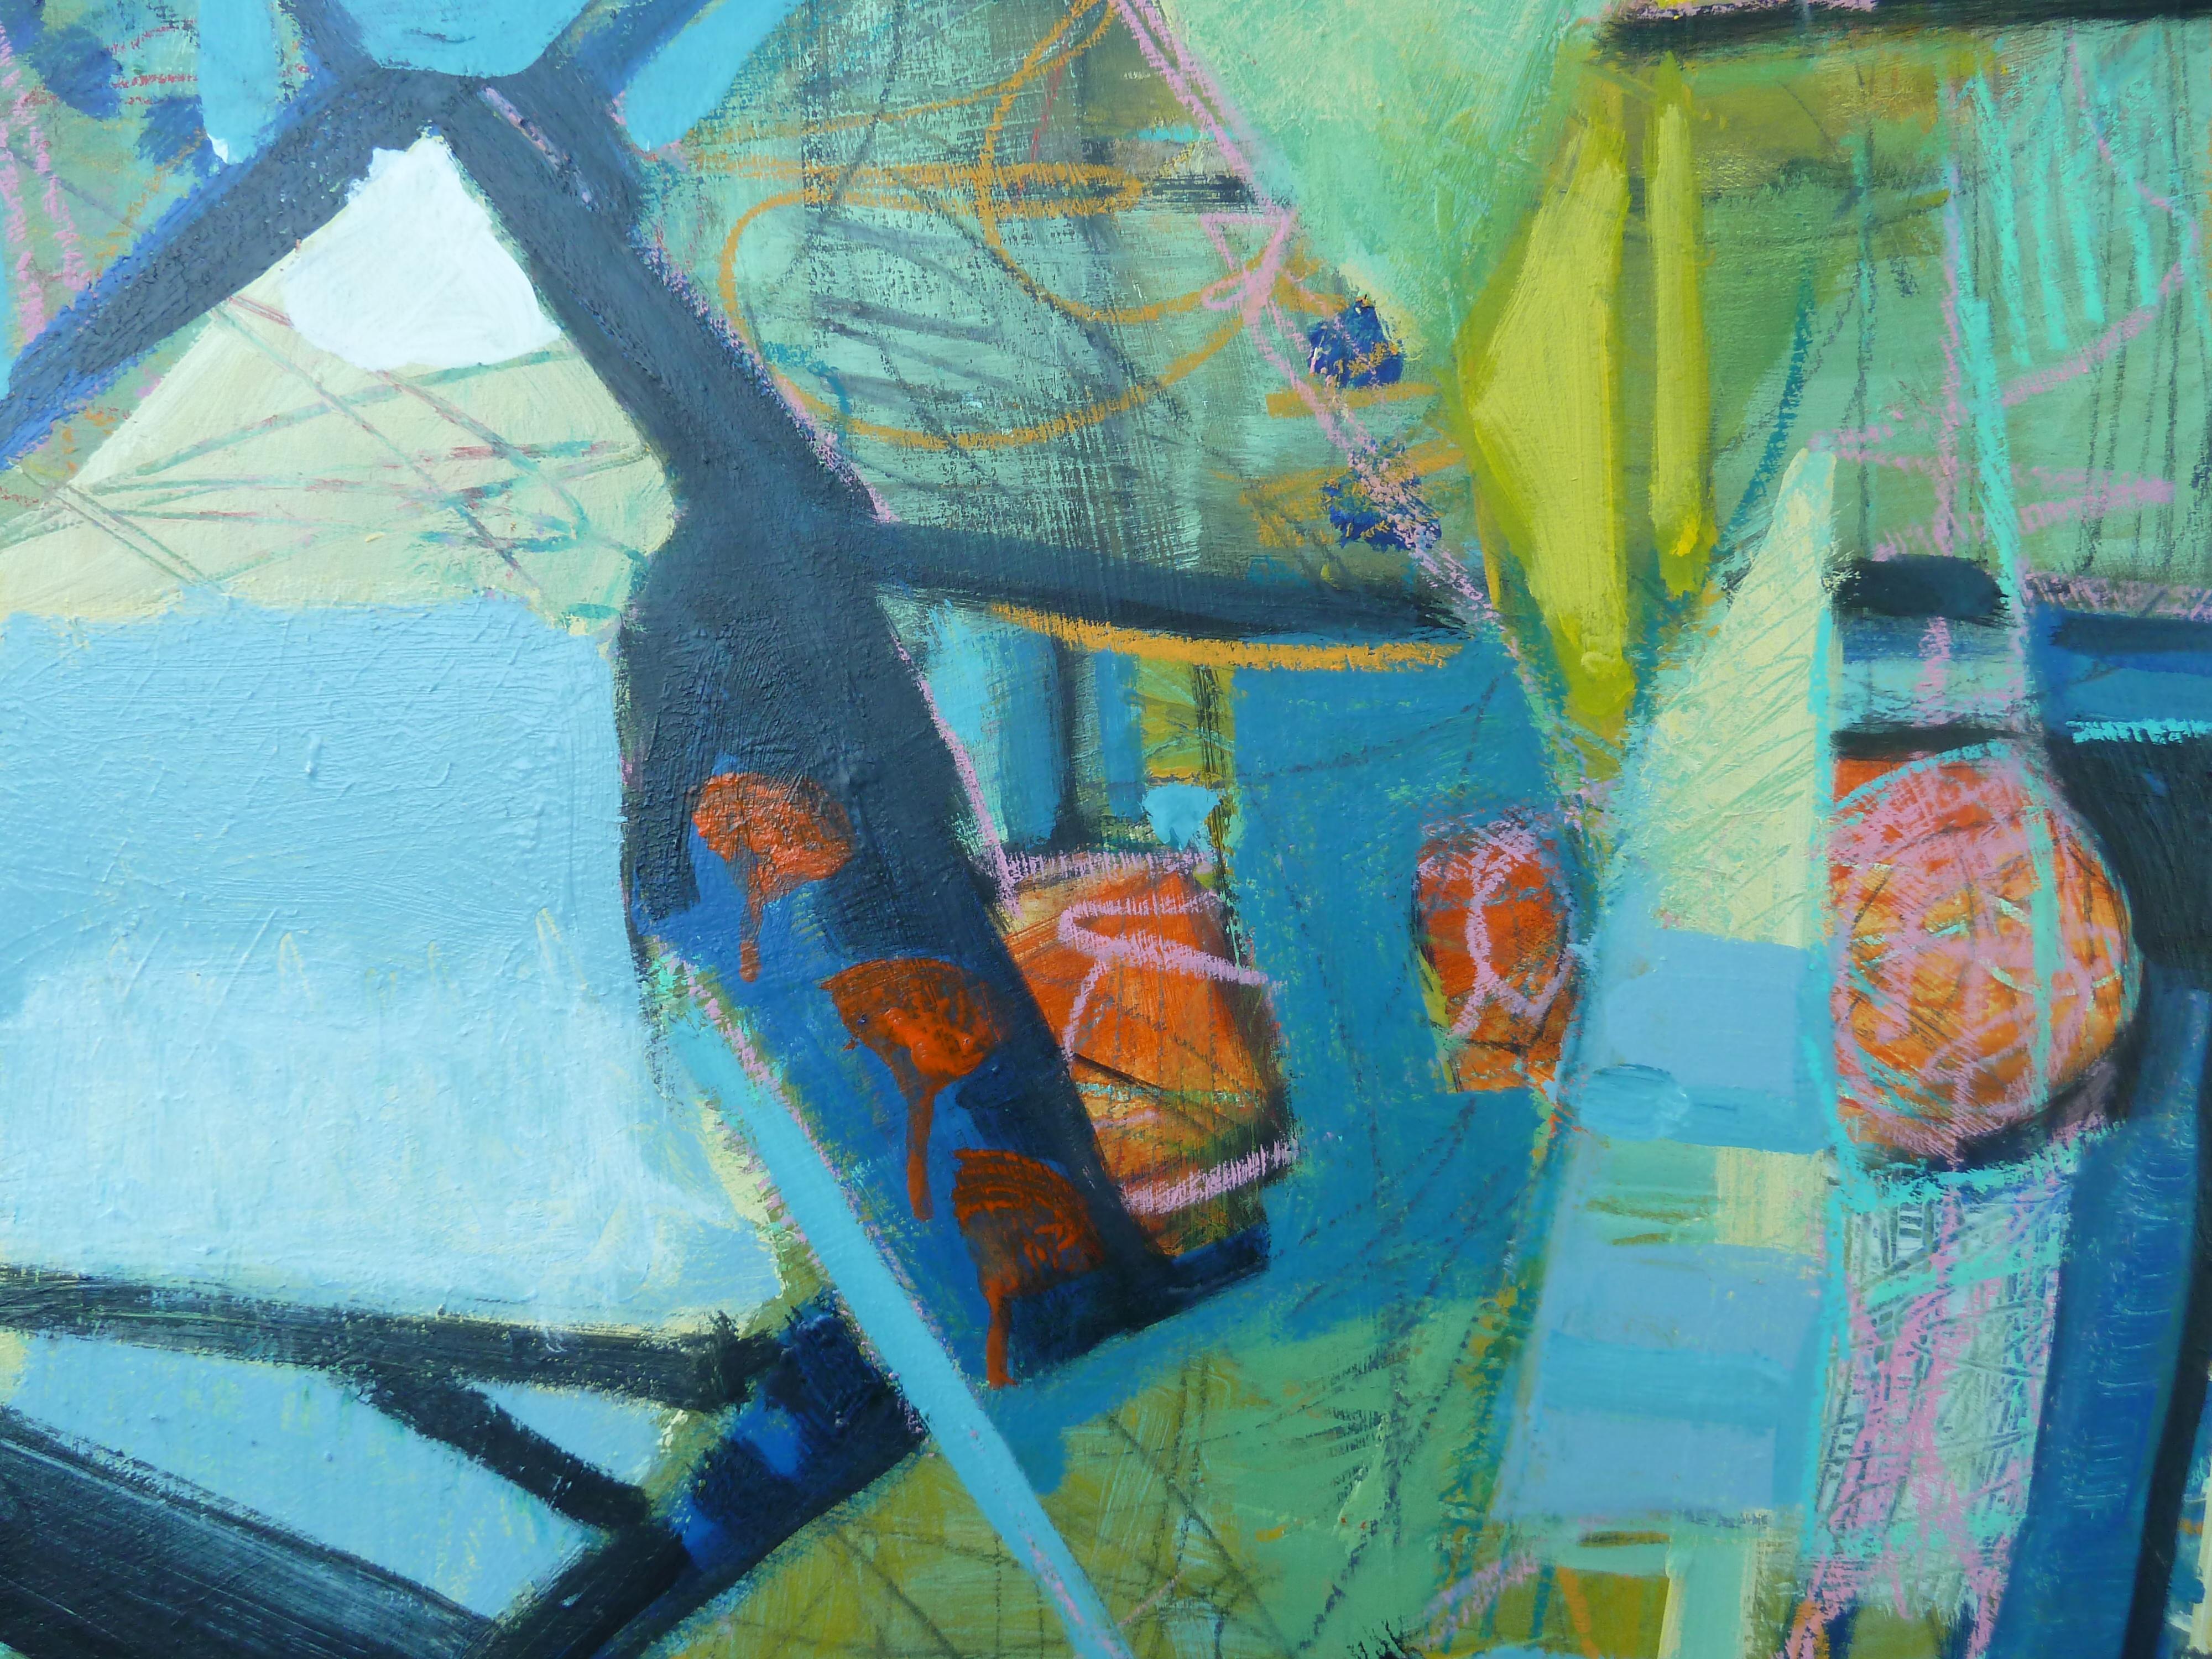 <p>Artist Comments<br>Artist Gail Ragains depicts three abstract figures sitting together in shades of blue, teal, green, and yellow. Warm accents of orange and pink balance the dominantly verdant composition. 